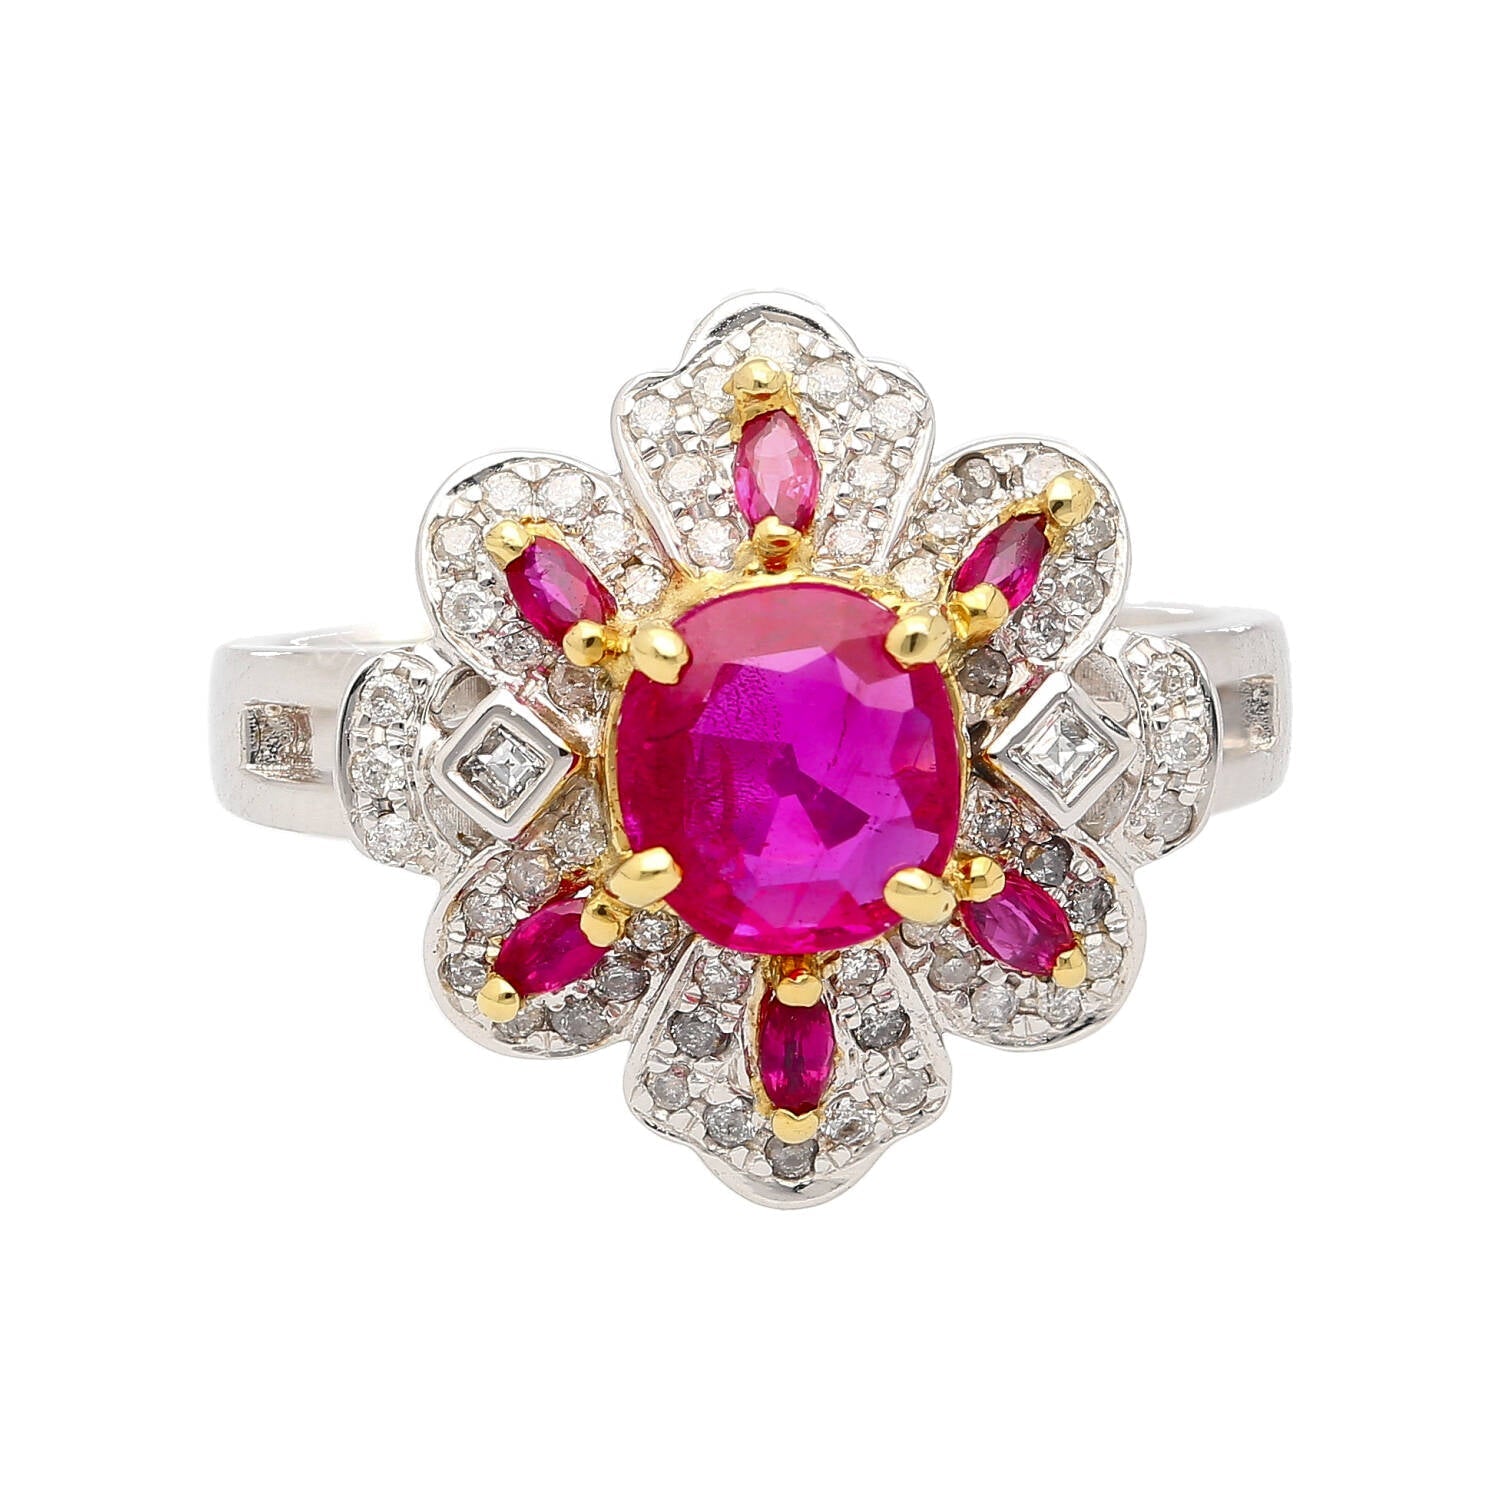 1.38 CTTW Natural Pinkish Red Ruby & Diamond Floral Motif Ring in 14K White Gold